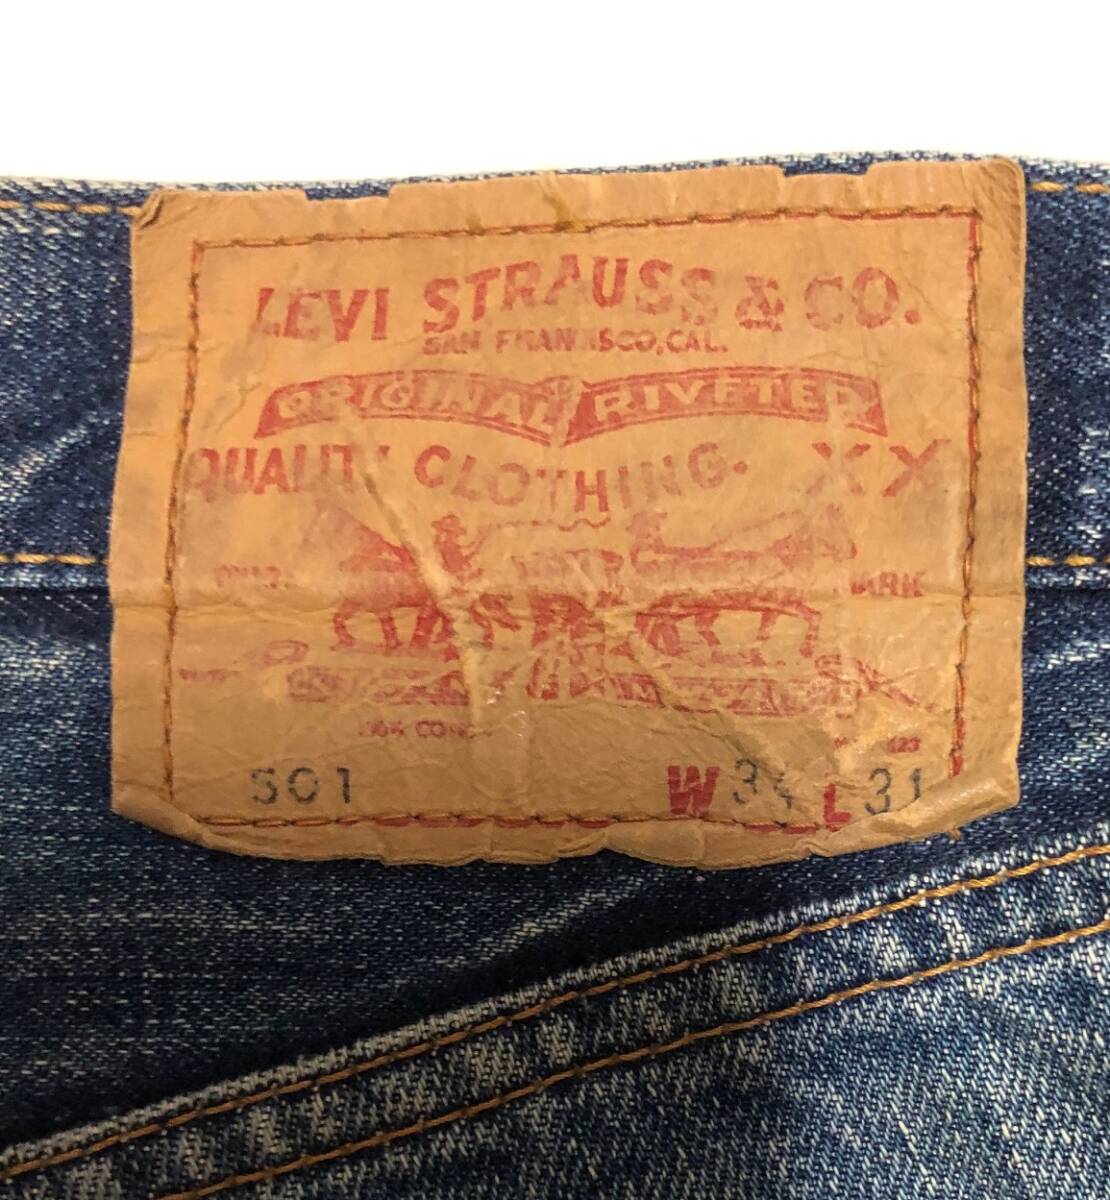 60S LEVIS Levi's 501BIGE..!.hige! bee. nest! Golden size absolute size W approximately 33 -inch repair ending [ besides Vintage exhibiting!]